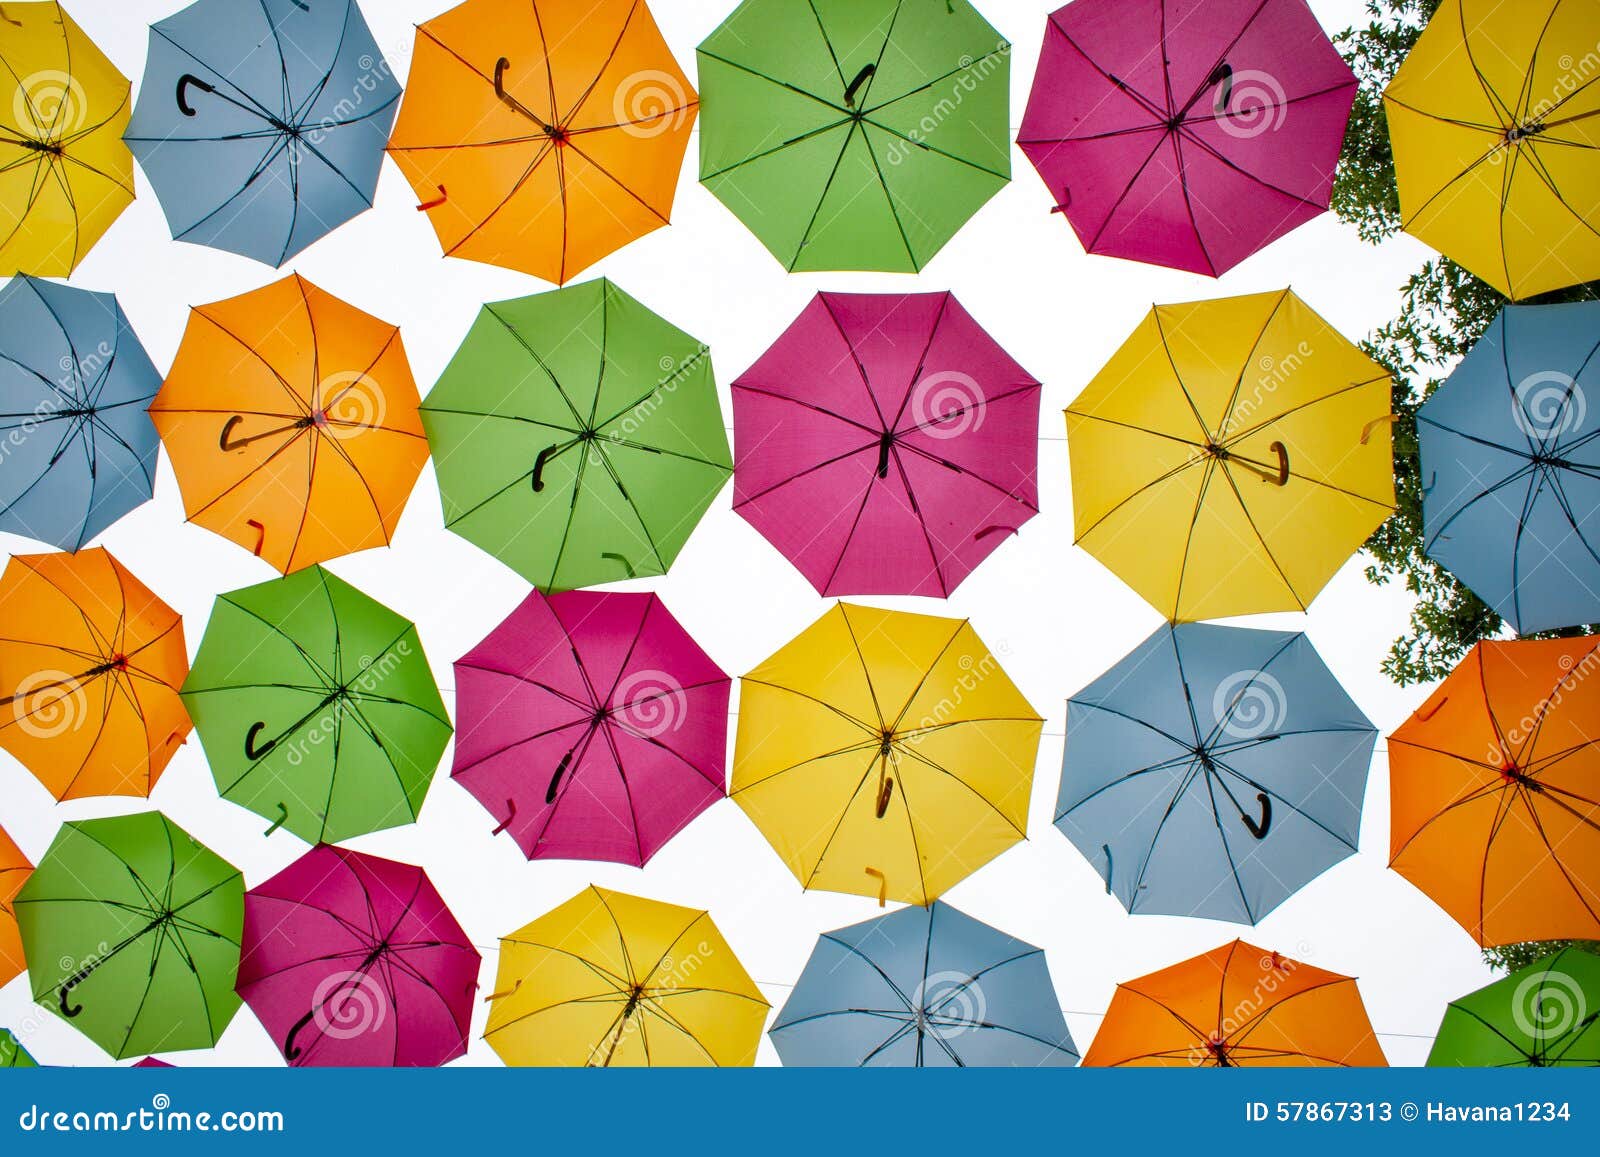 different colored umbrellas hanging in the air.